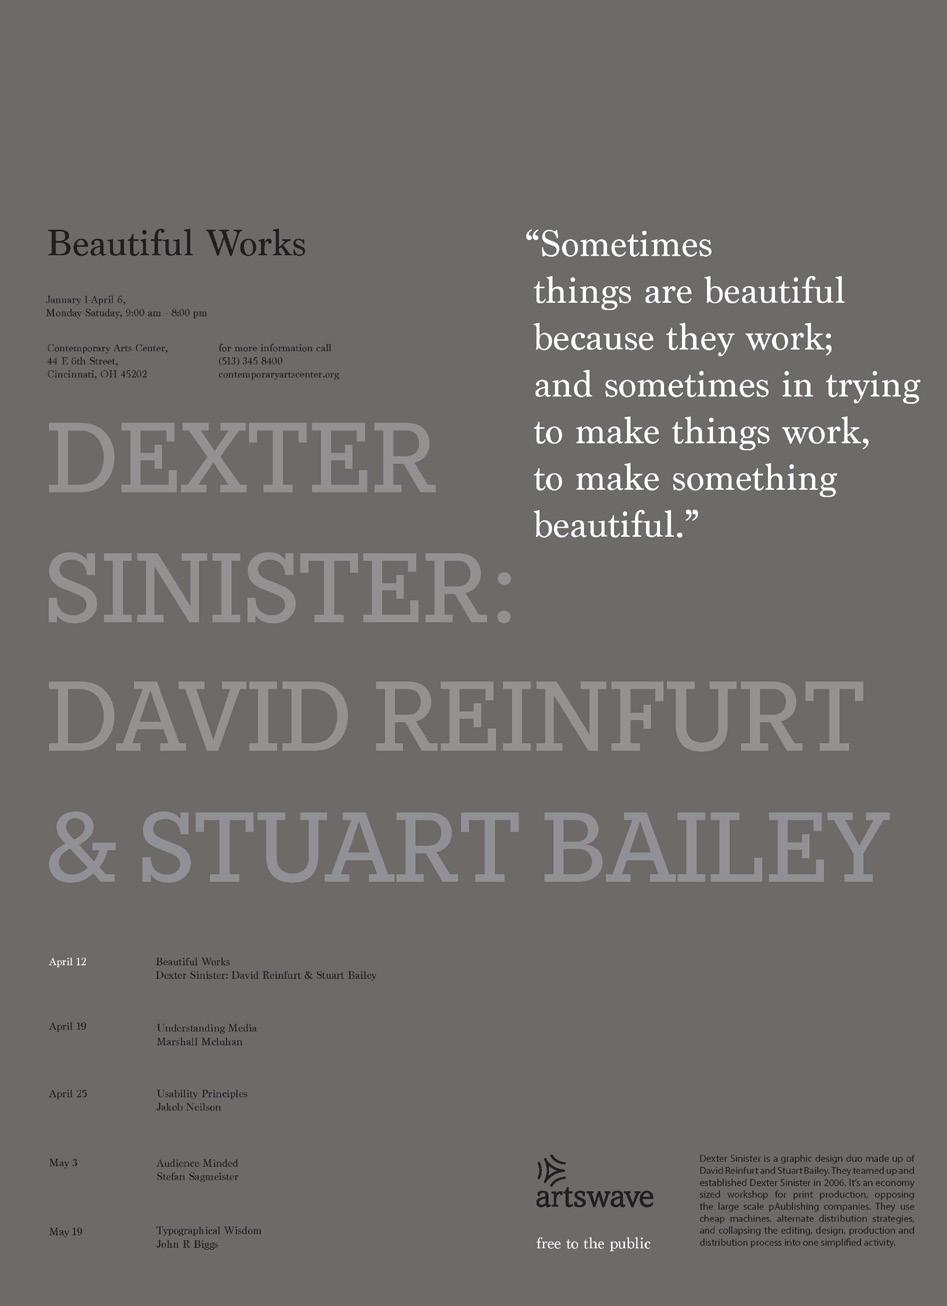 Inspiration was based on Dexter Sinister and their Beautiful Works quote Sometimes things are beautiful because they work and sometimes in trying to male things work, to make things work, to make